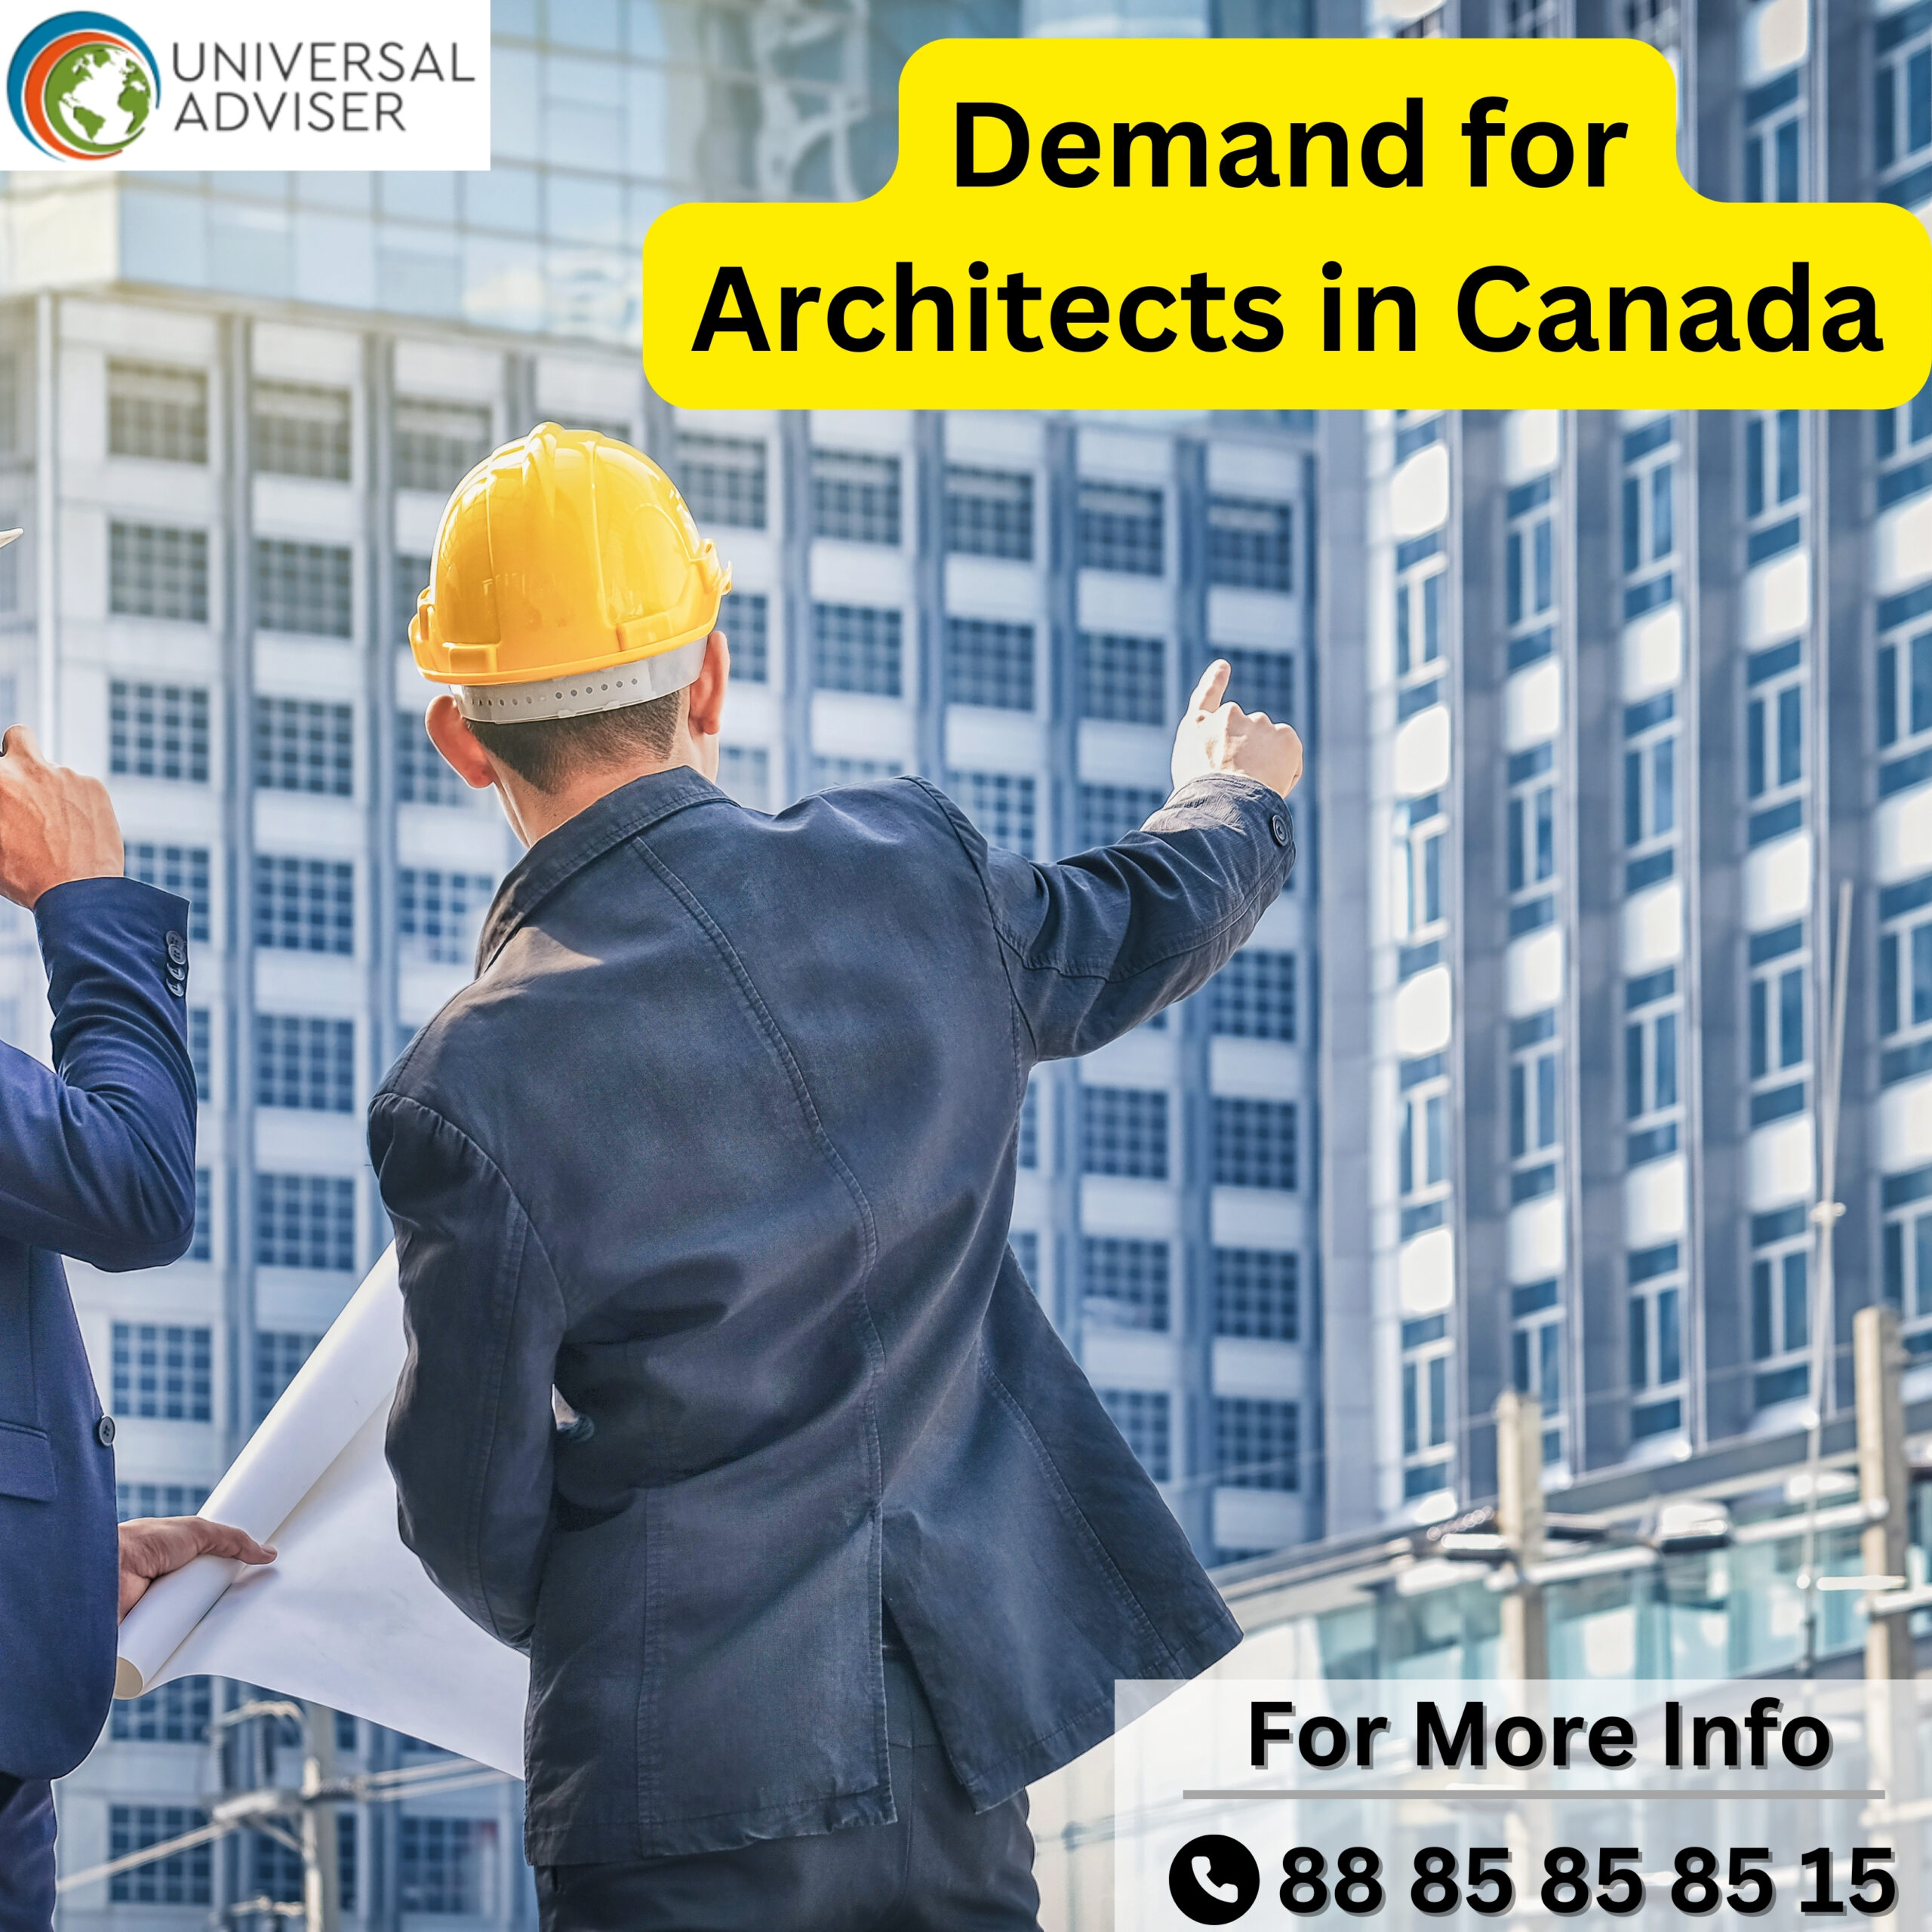 Demand for Architects in Canada